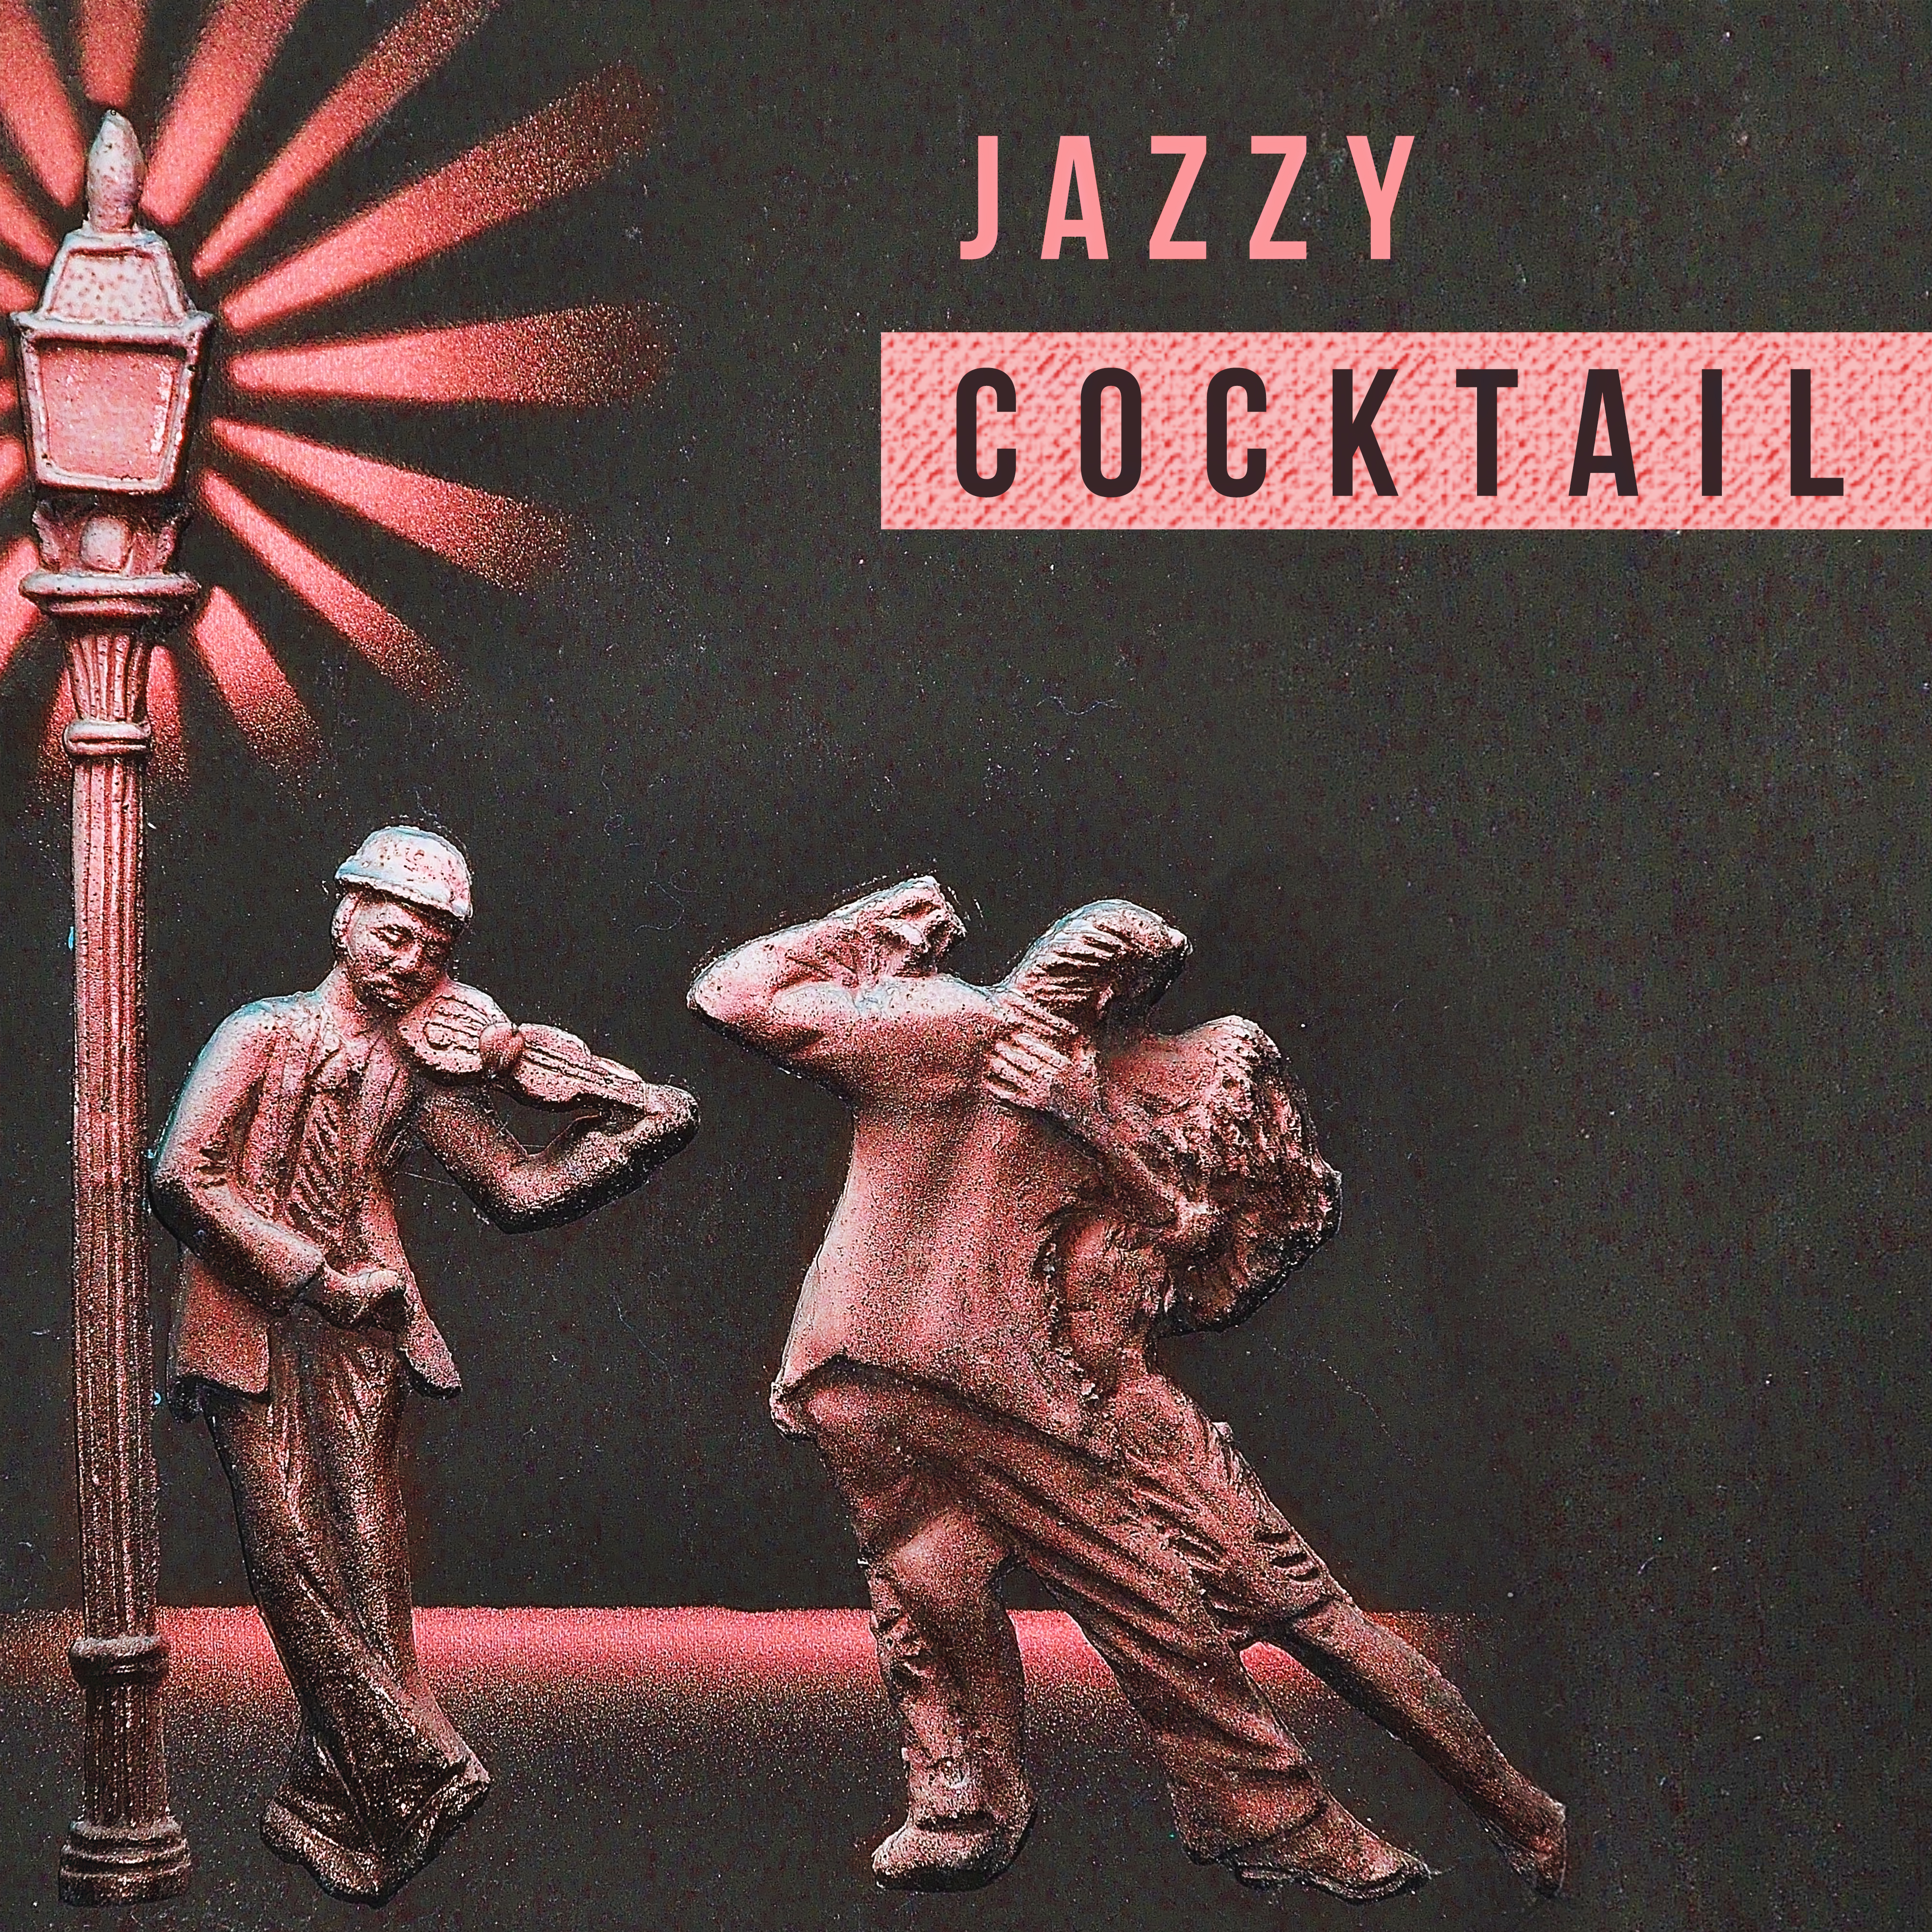 Jazzy Cocktail - Bossa Nova Chill Lounge Music 2016, Best for Cocktail Party, Easy Listening